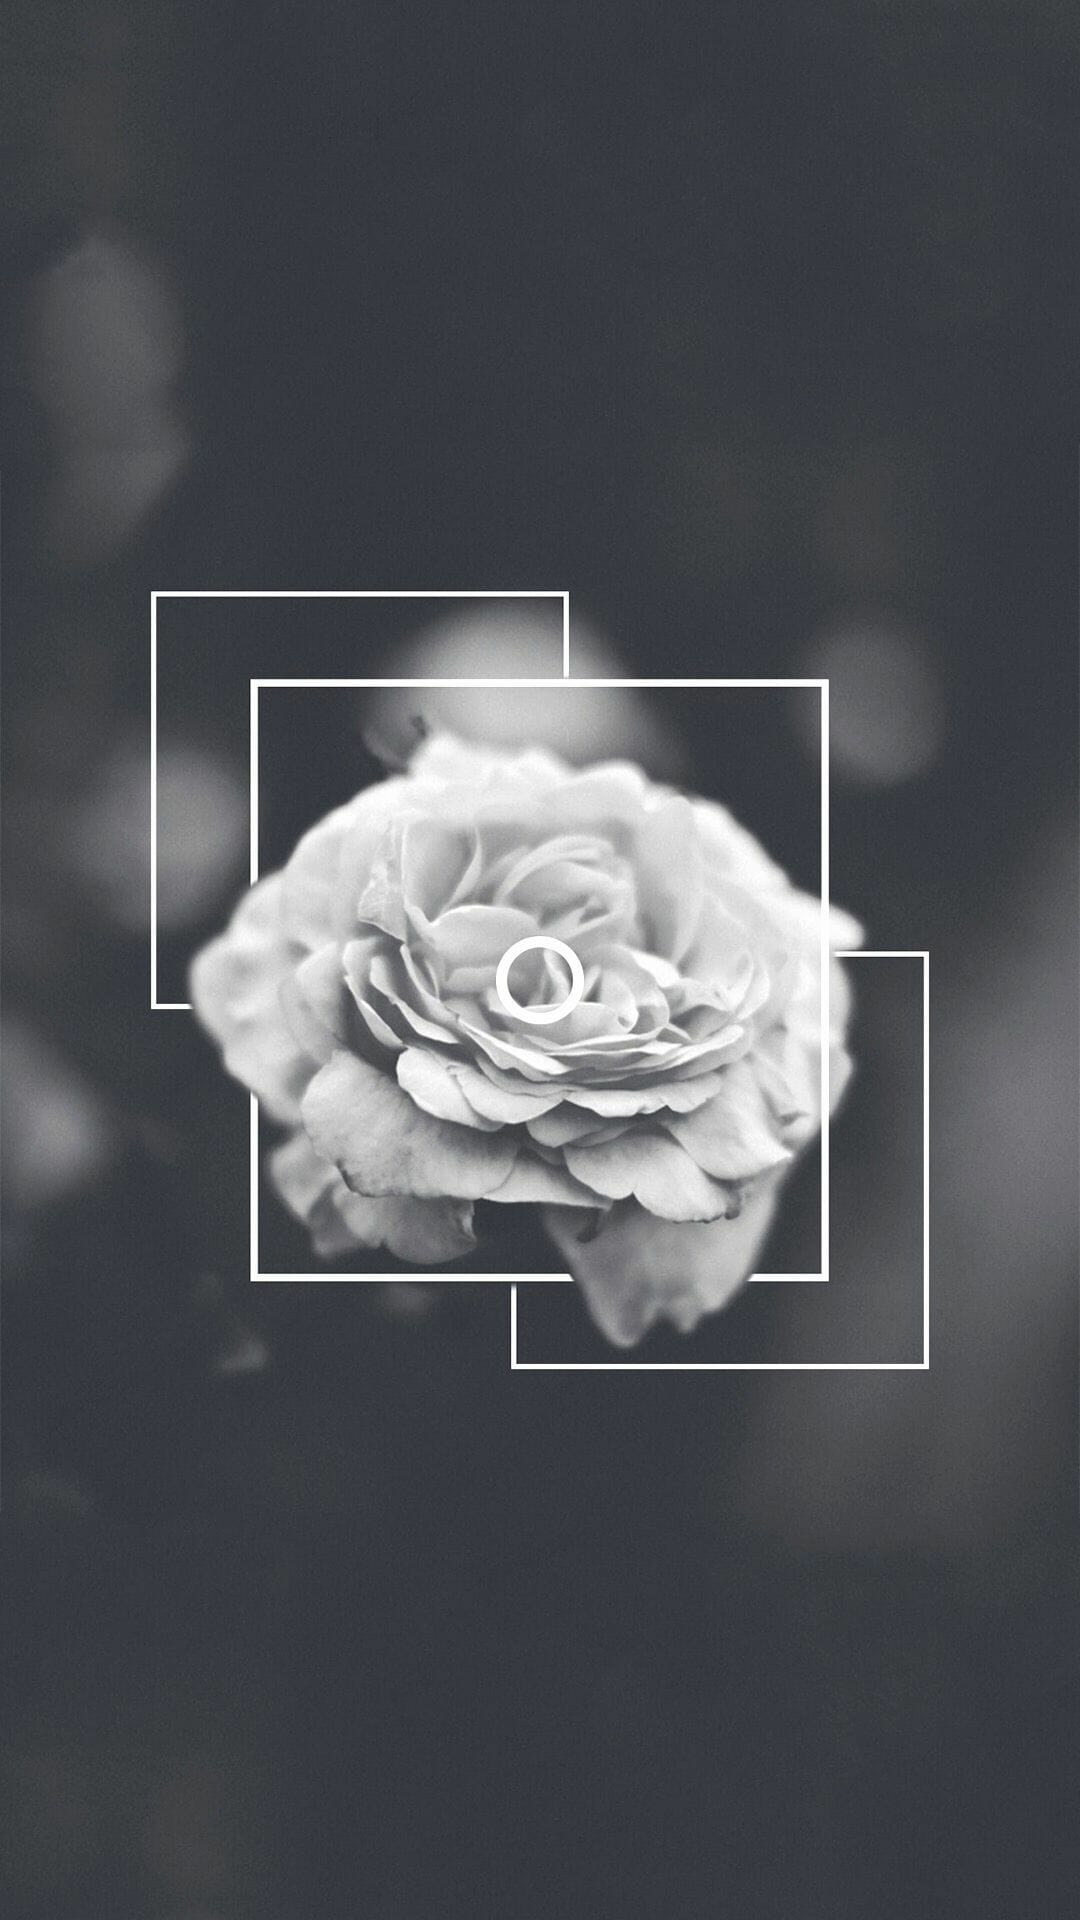 Black and white flower in a frame wallpaper 1080x1920 - White, black phone, photography, black glitch, black and white, dark, black, beautiful, dark phone, black rose, gray, medical, roses, creepy, cute white